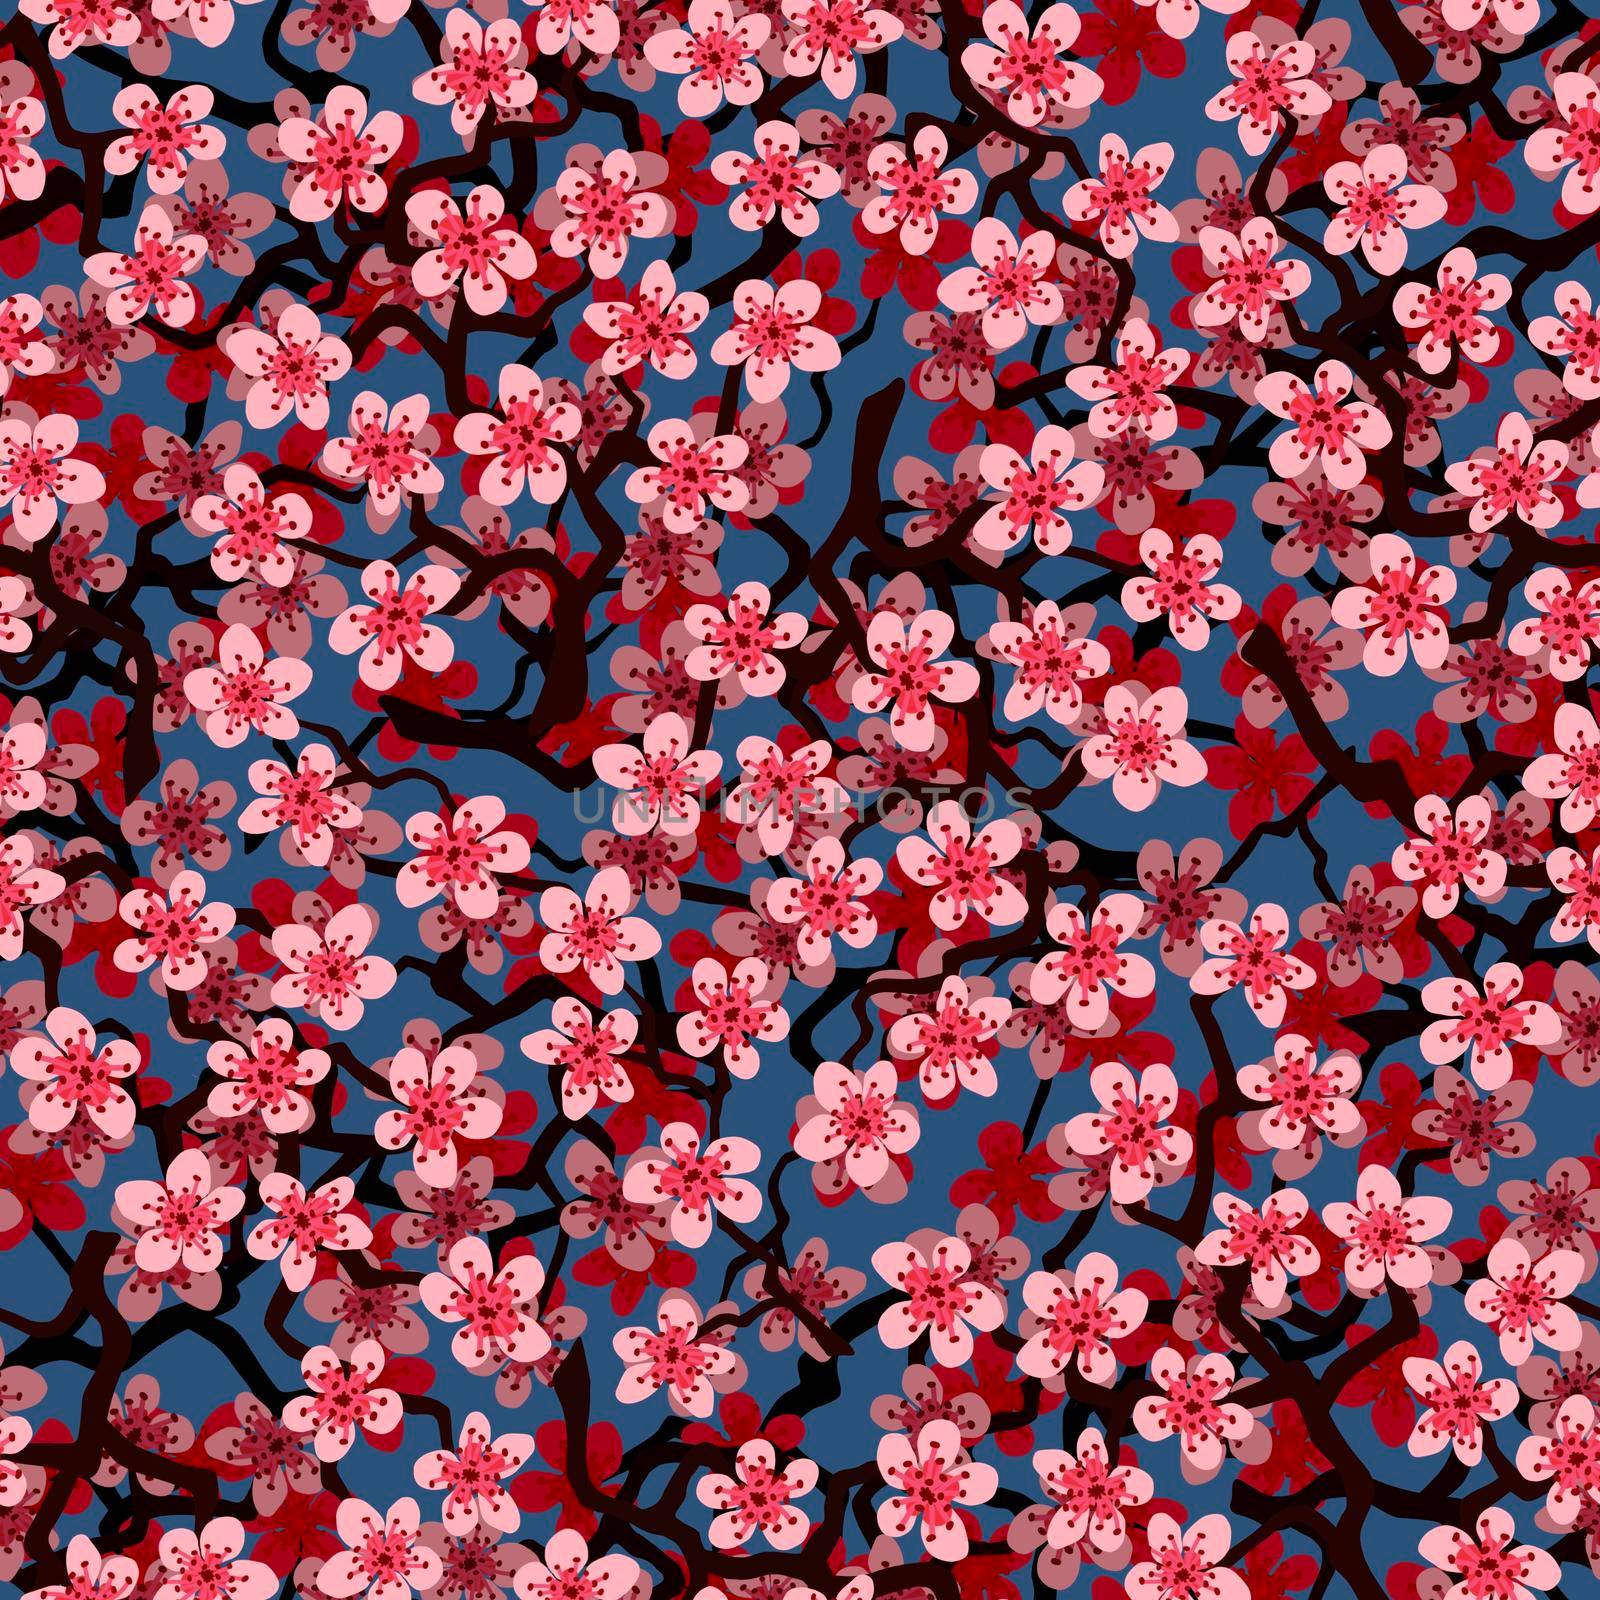 Seamless pattern with blossoming Japanese cherry sakura branches for fabric,packaging,wallpaper,textile decor,design, invitations,print,gift wrap,manufacturing.Pink flowers on blue background